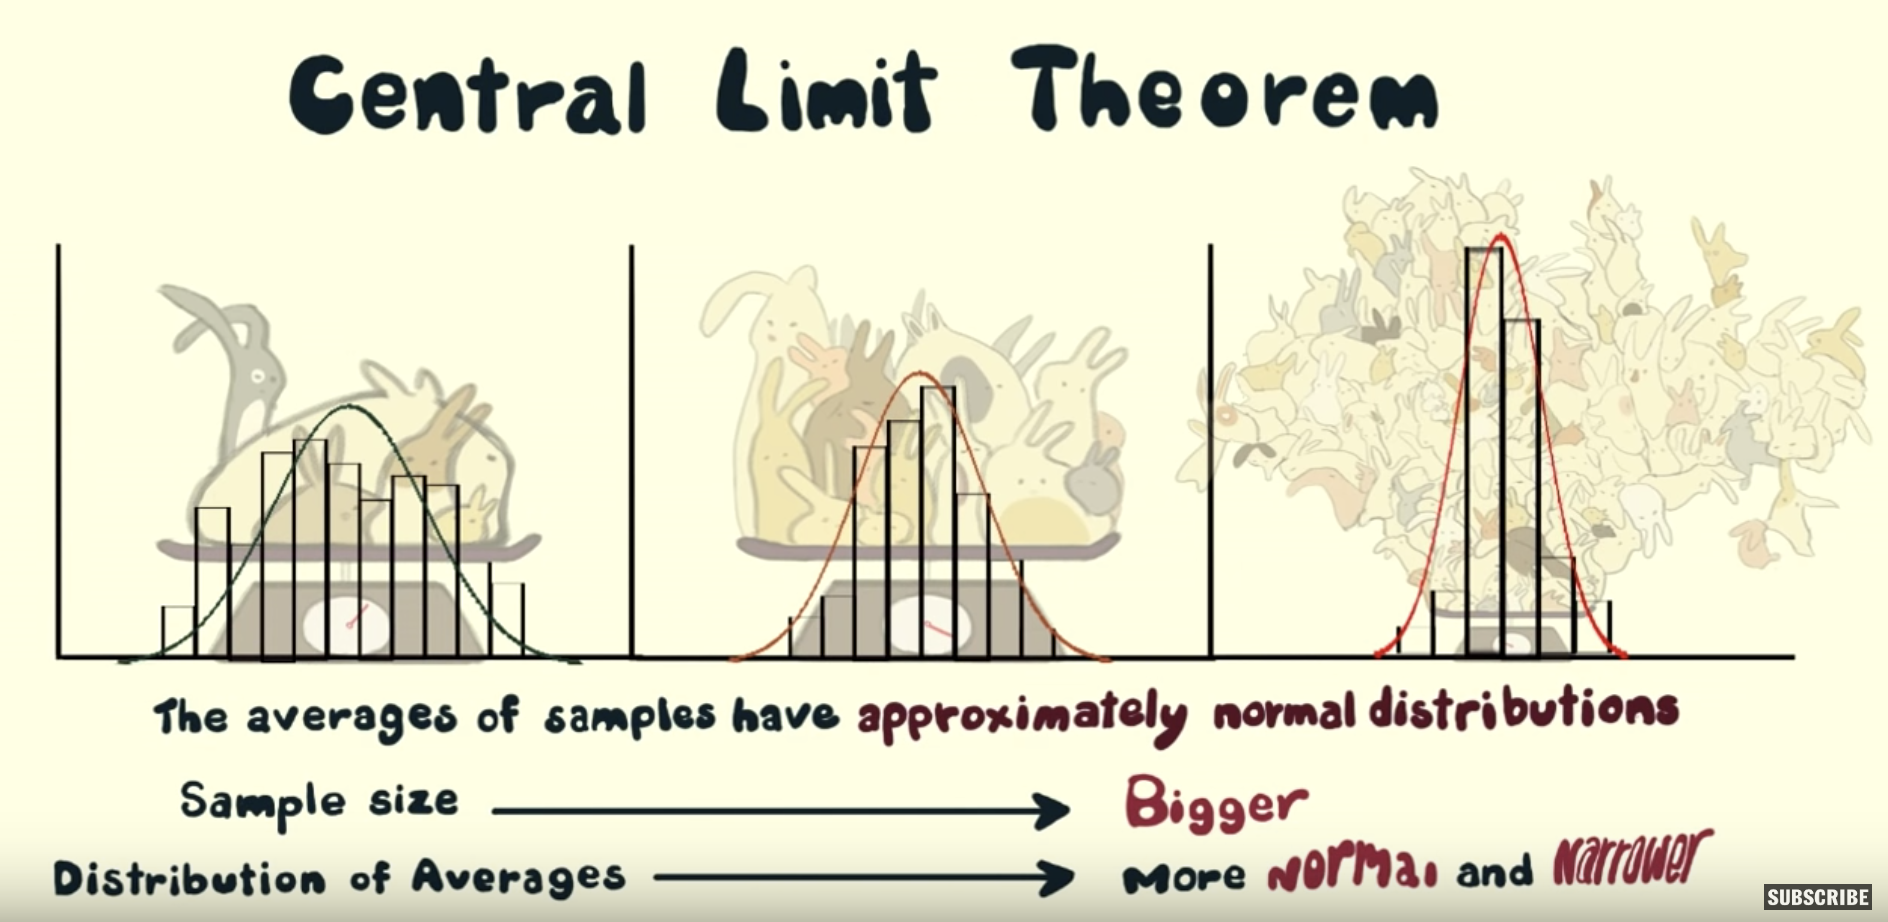 Preview of Central Limit Theorem video.